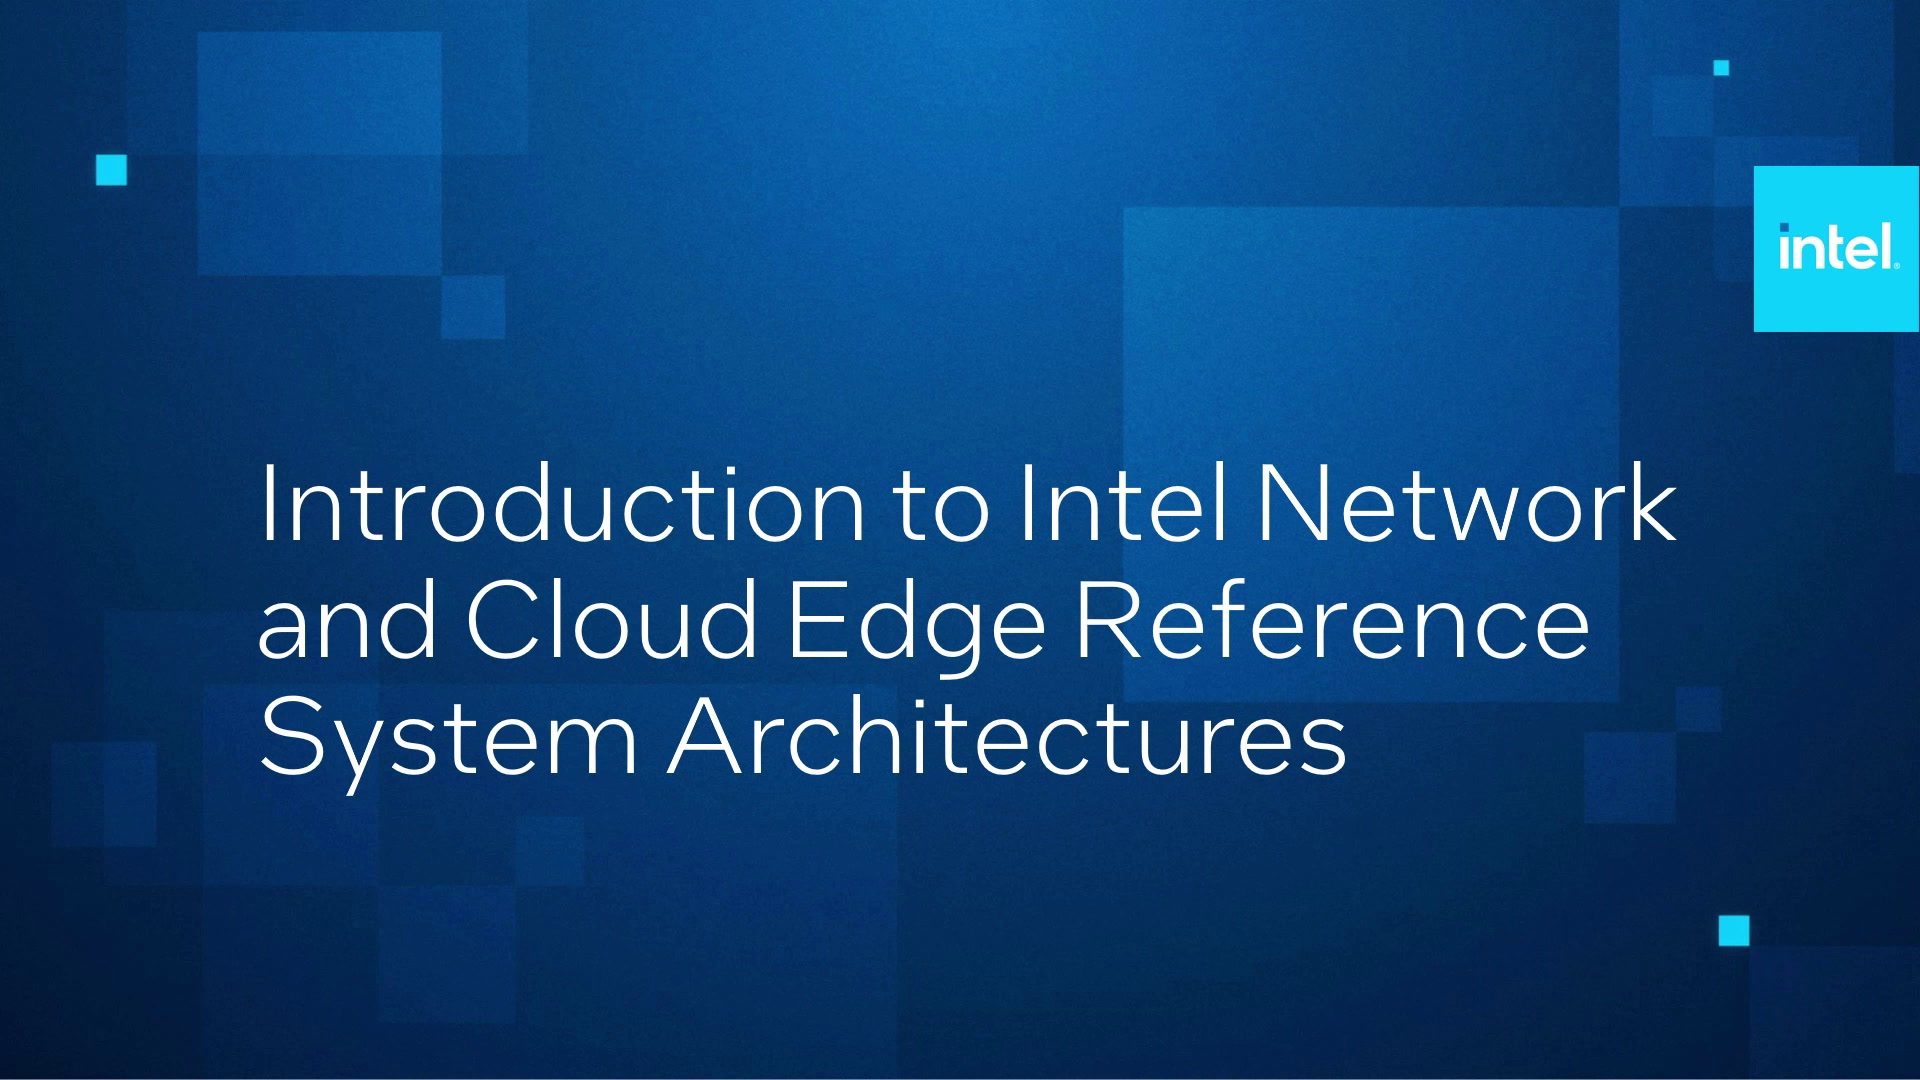 Intel Network Platform Network and Cloud Edge Reference Architectures